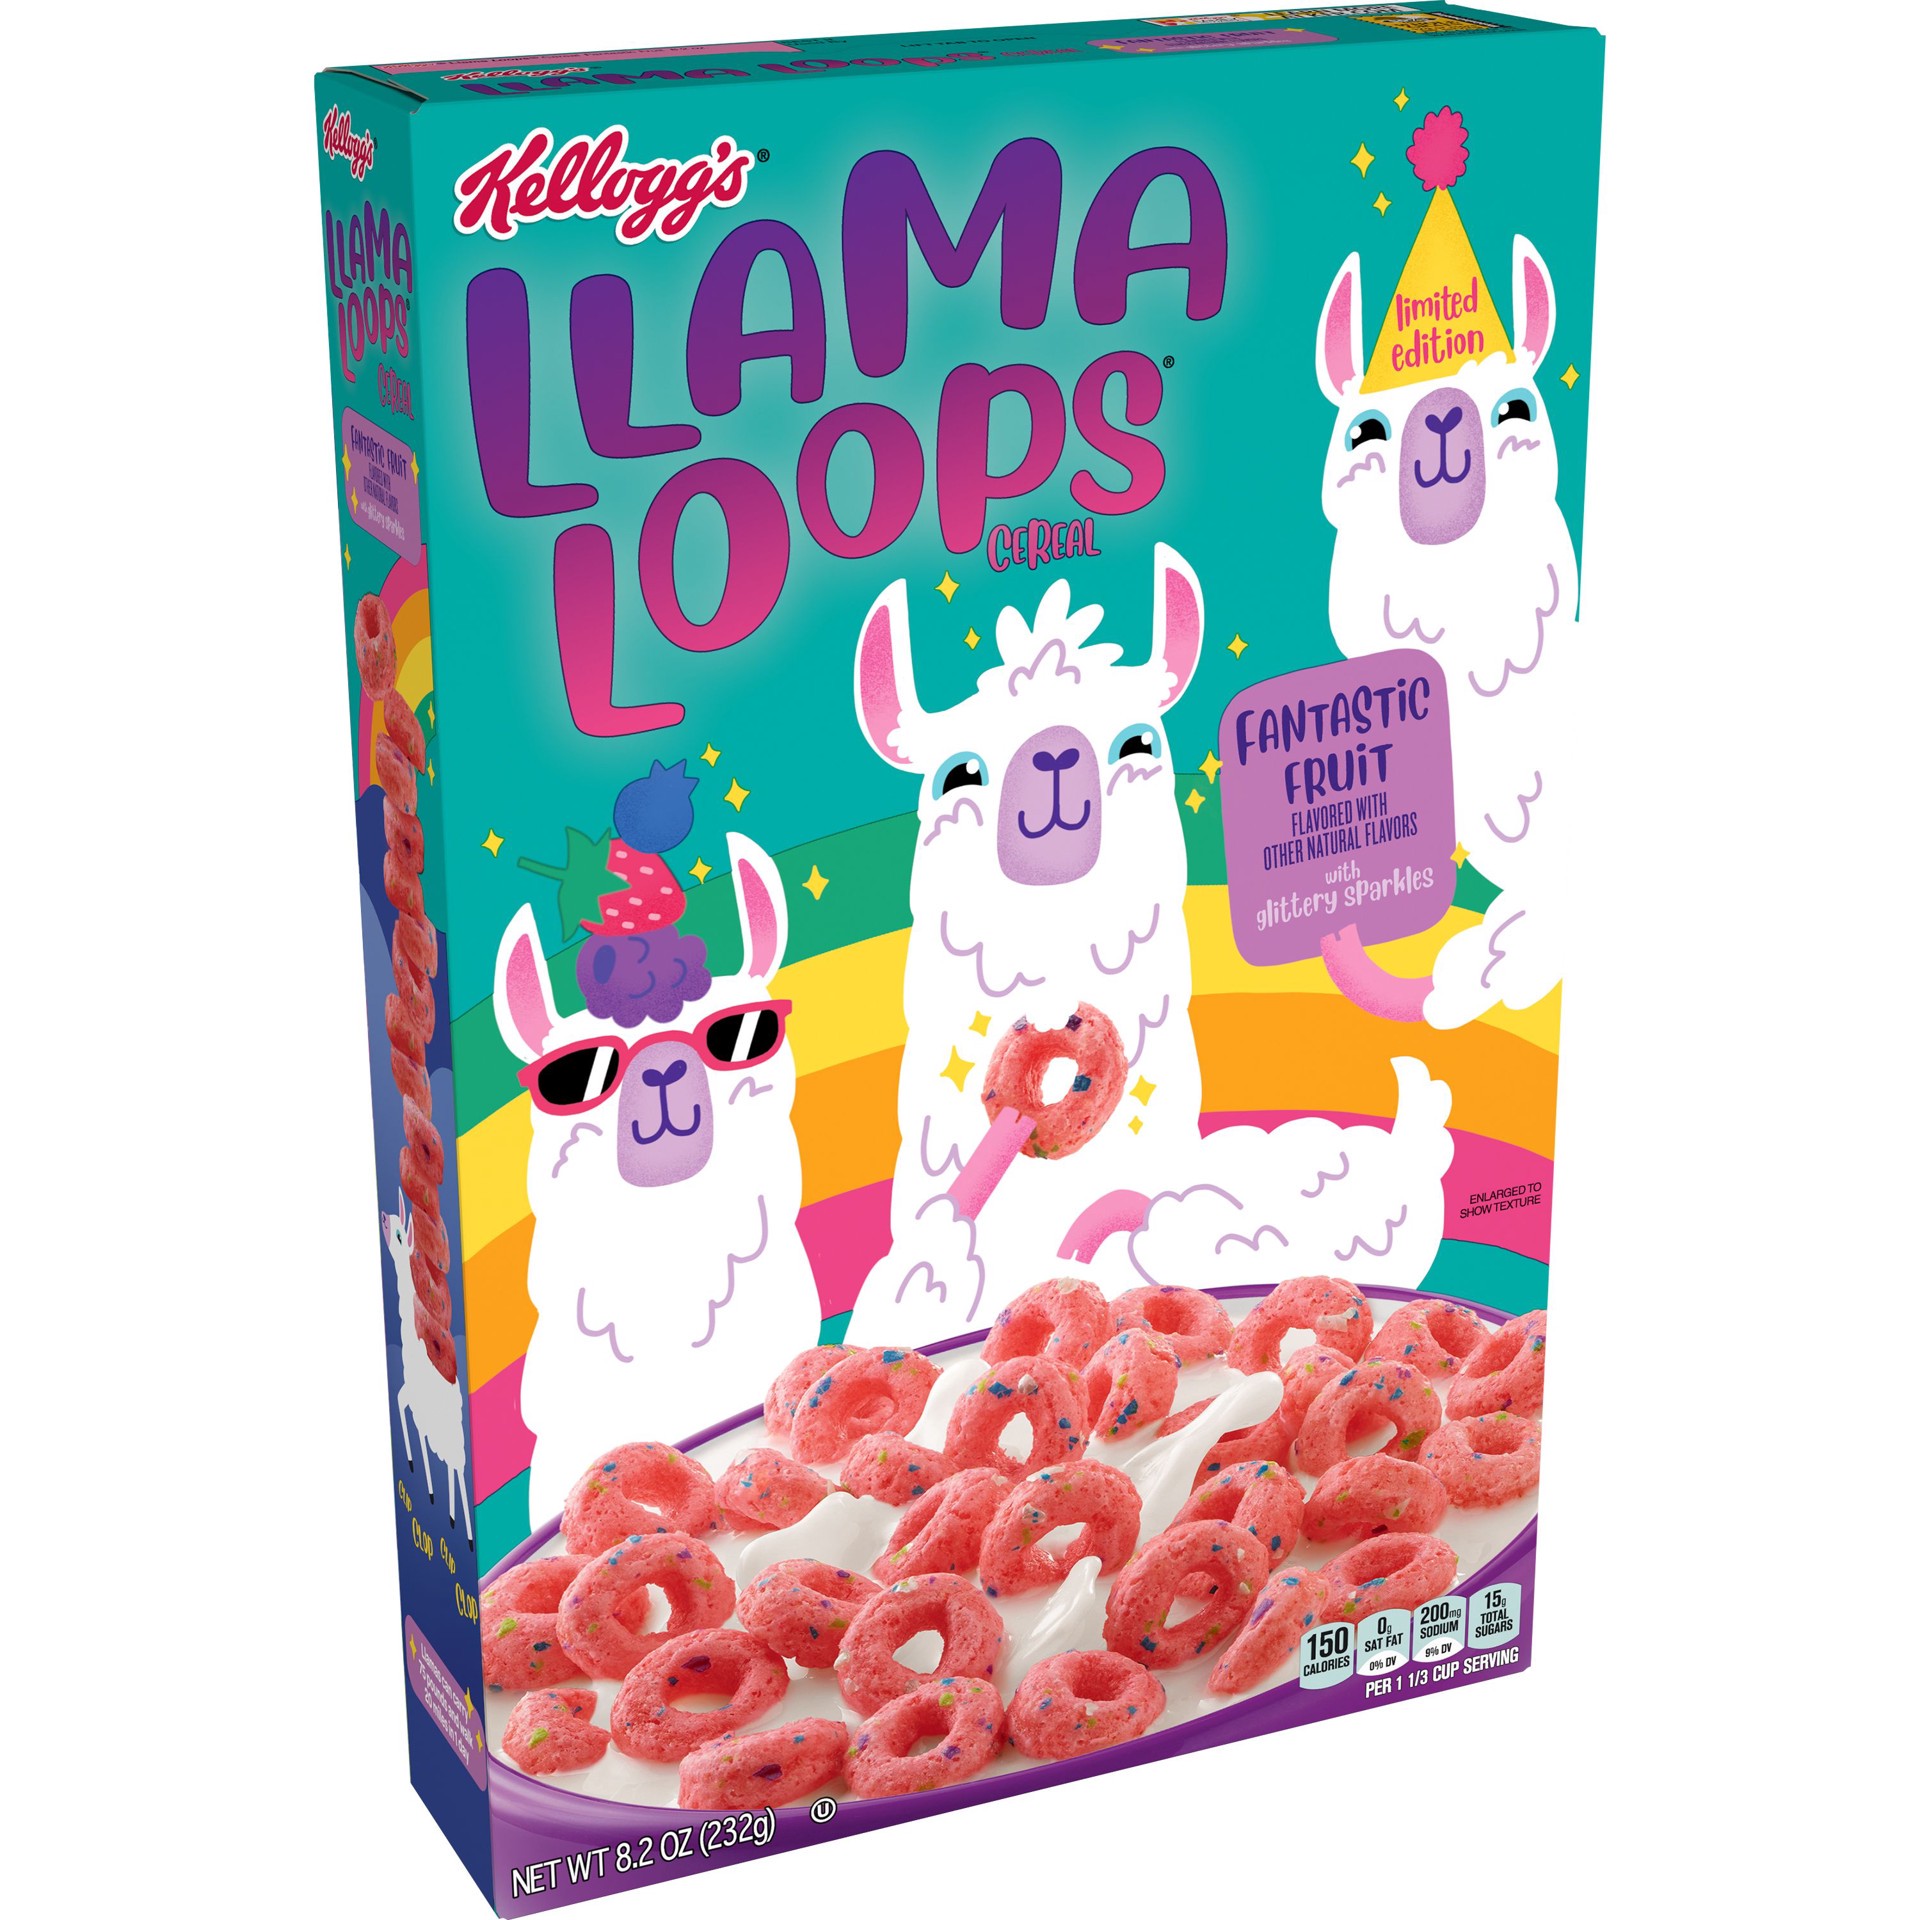 slide 1 of 5, Llama Loops Fantastic Fruit with Glittery Sparkles Breakfast Cereal, 8.2 oz